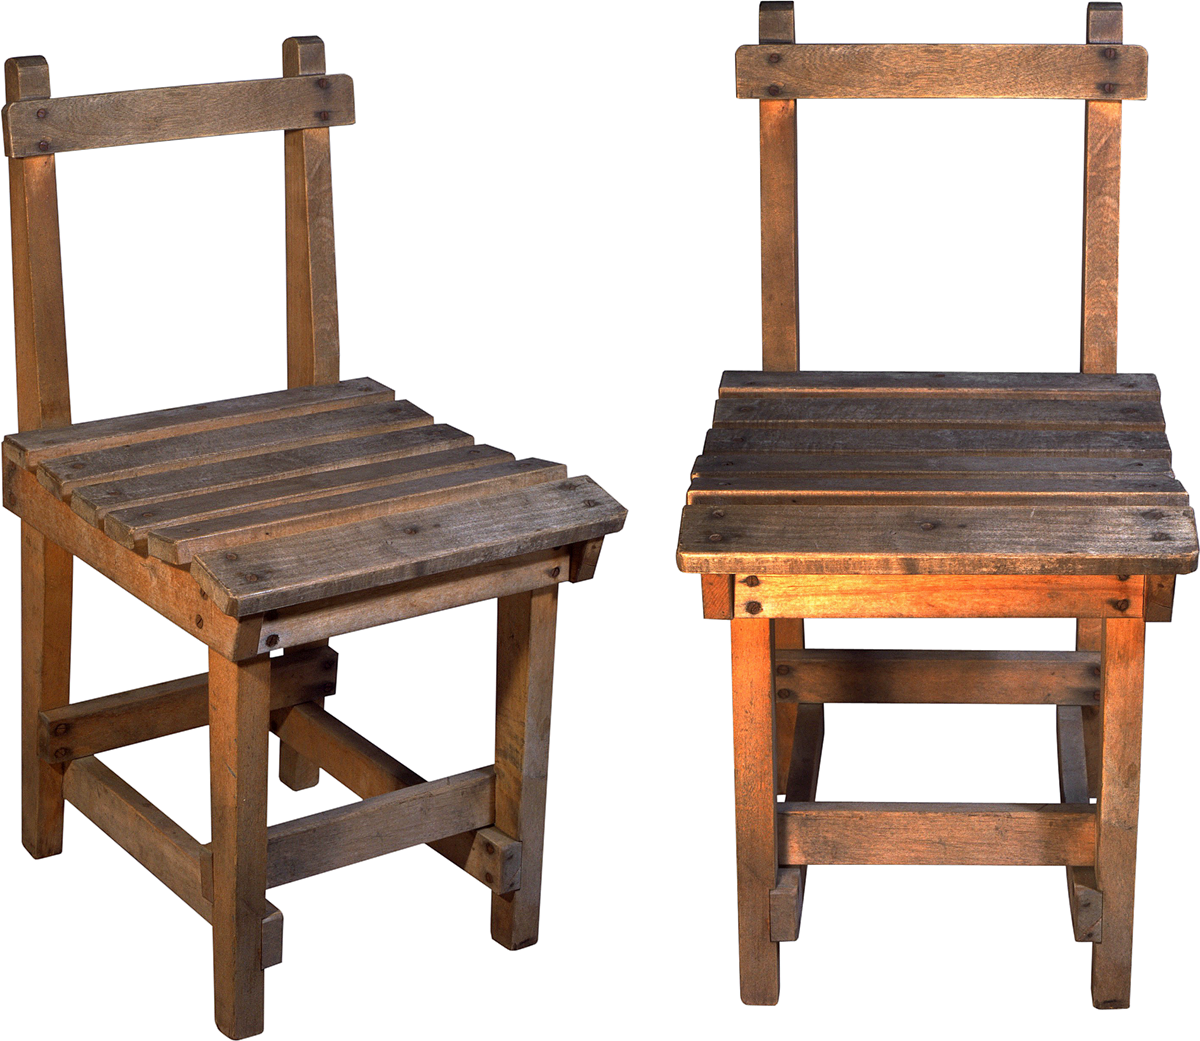 Download PNG image - Chair PNG Transparent Image 